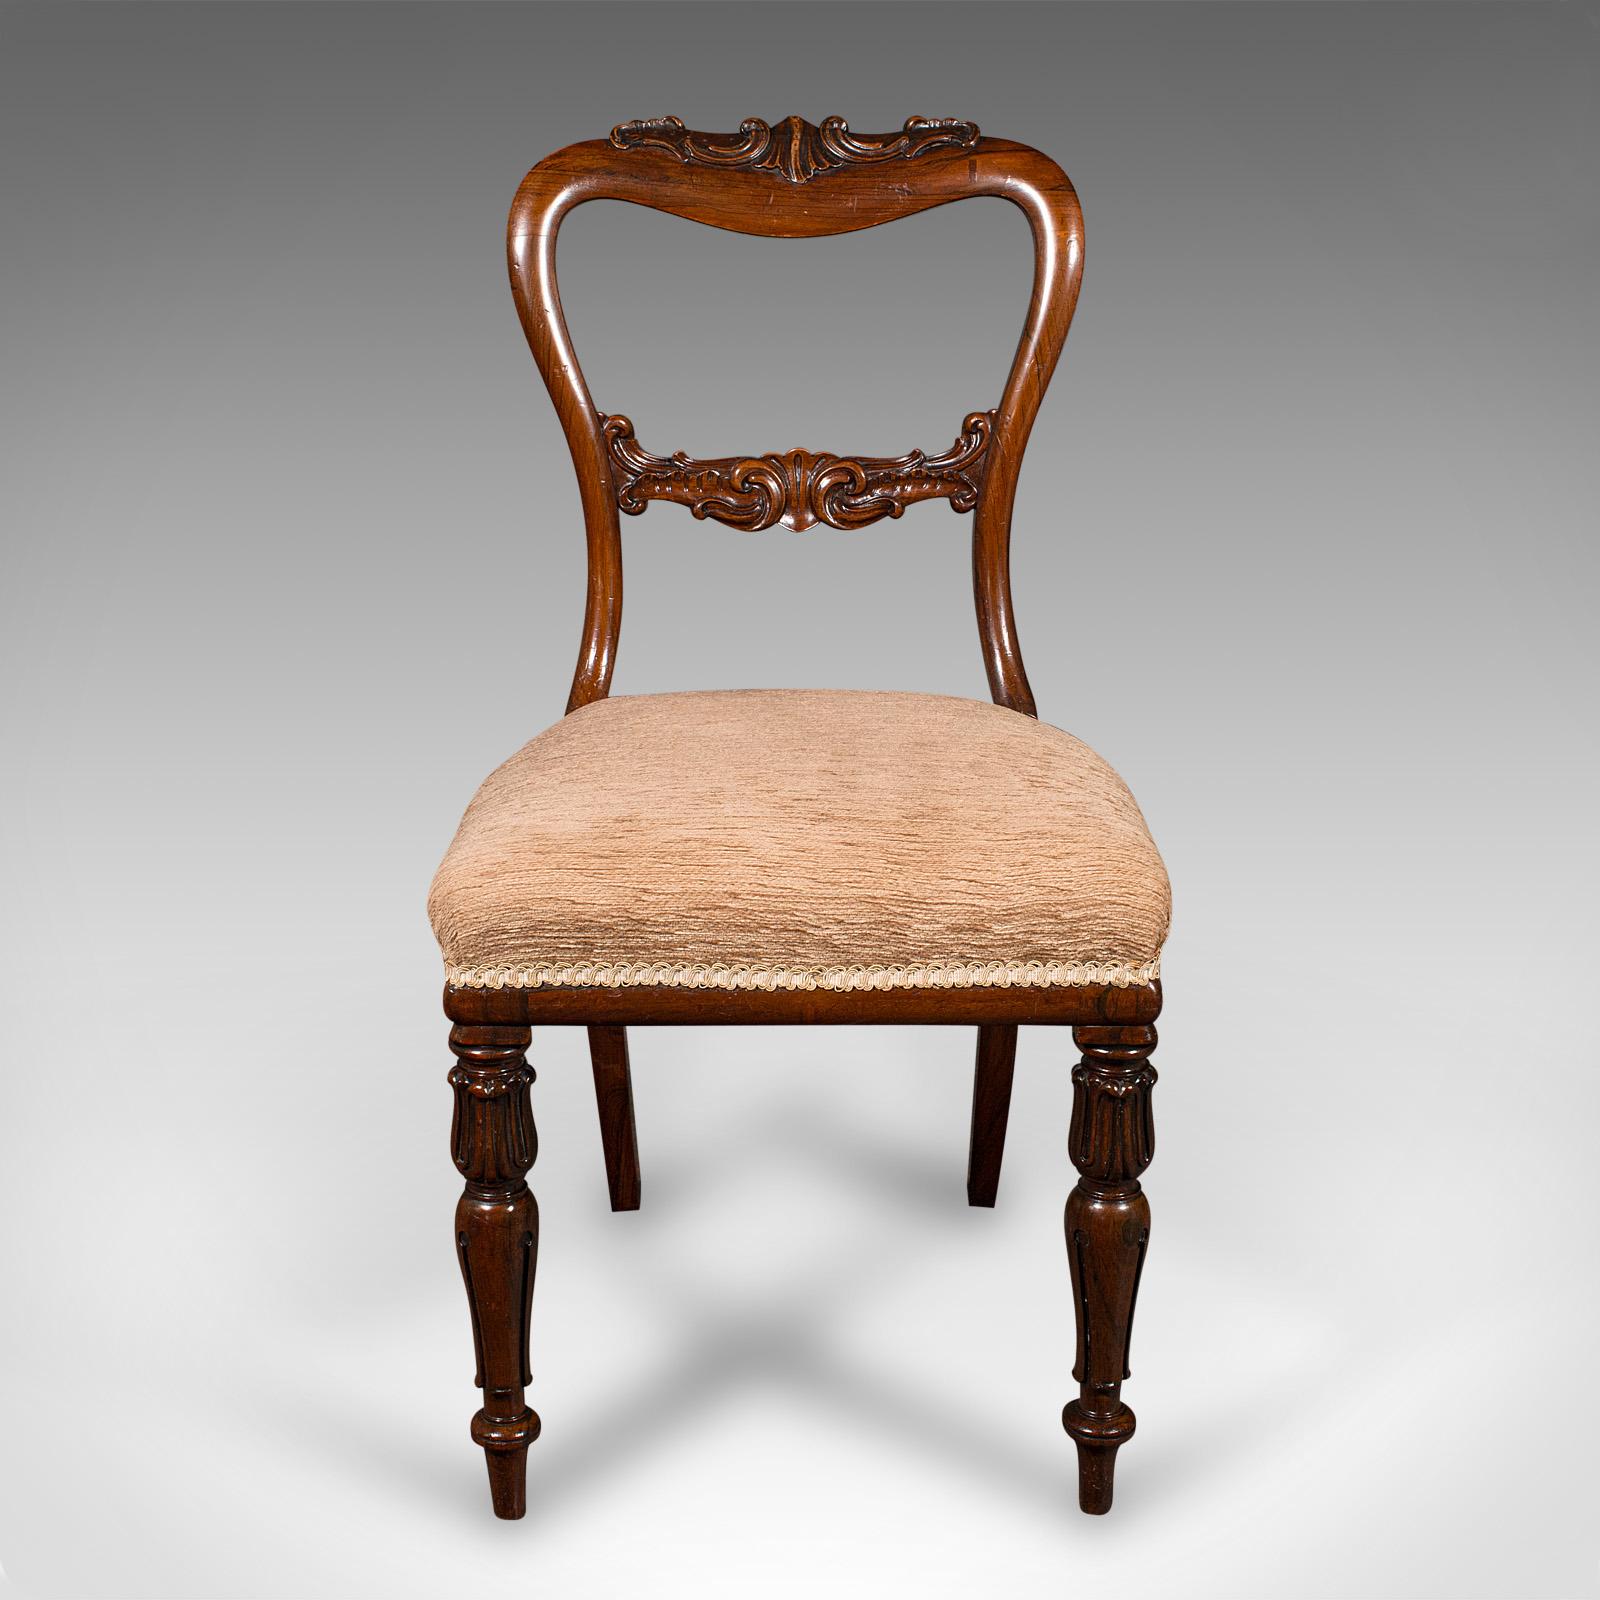 This is a set of 5 antique dining chairs. A Scottish, rosewood buckle back seat, dating to the William IV period, circa 1835.

Pleasingly decorative suite of dining chairs of fine quality and craftsmanship
Displaying a desirable aged patina and in